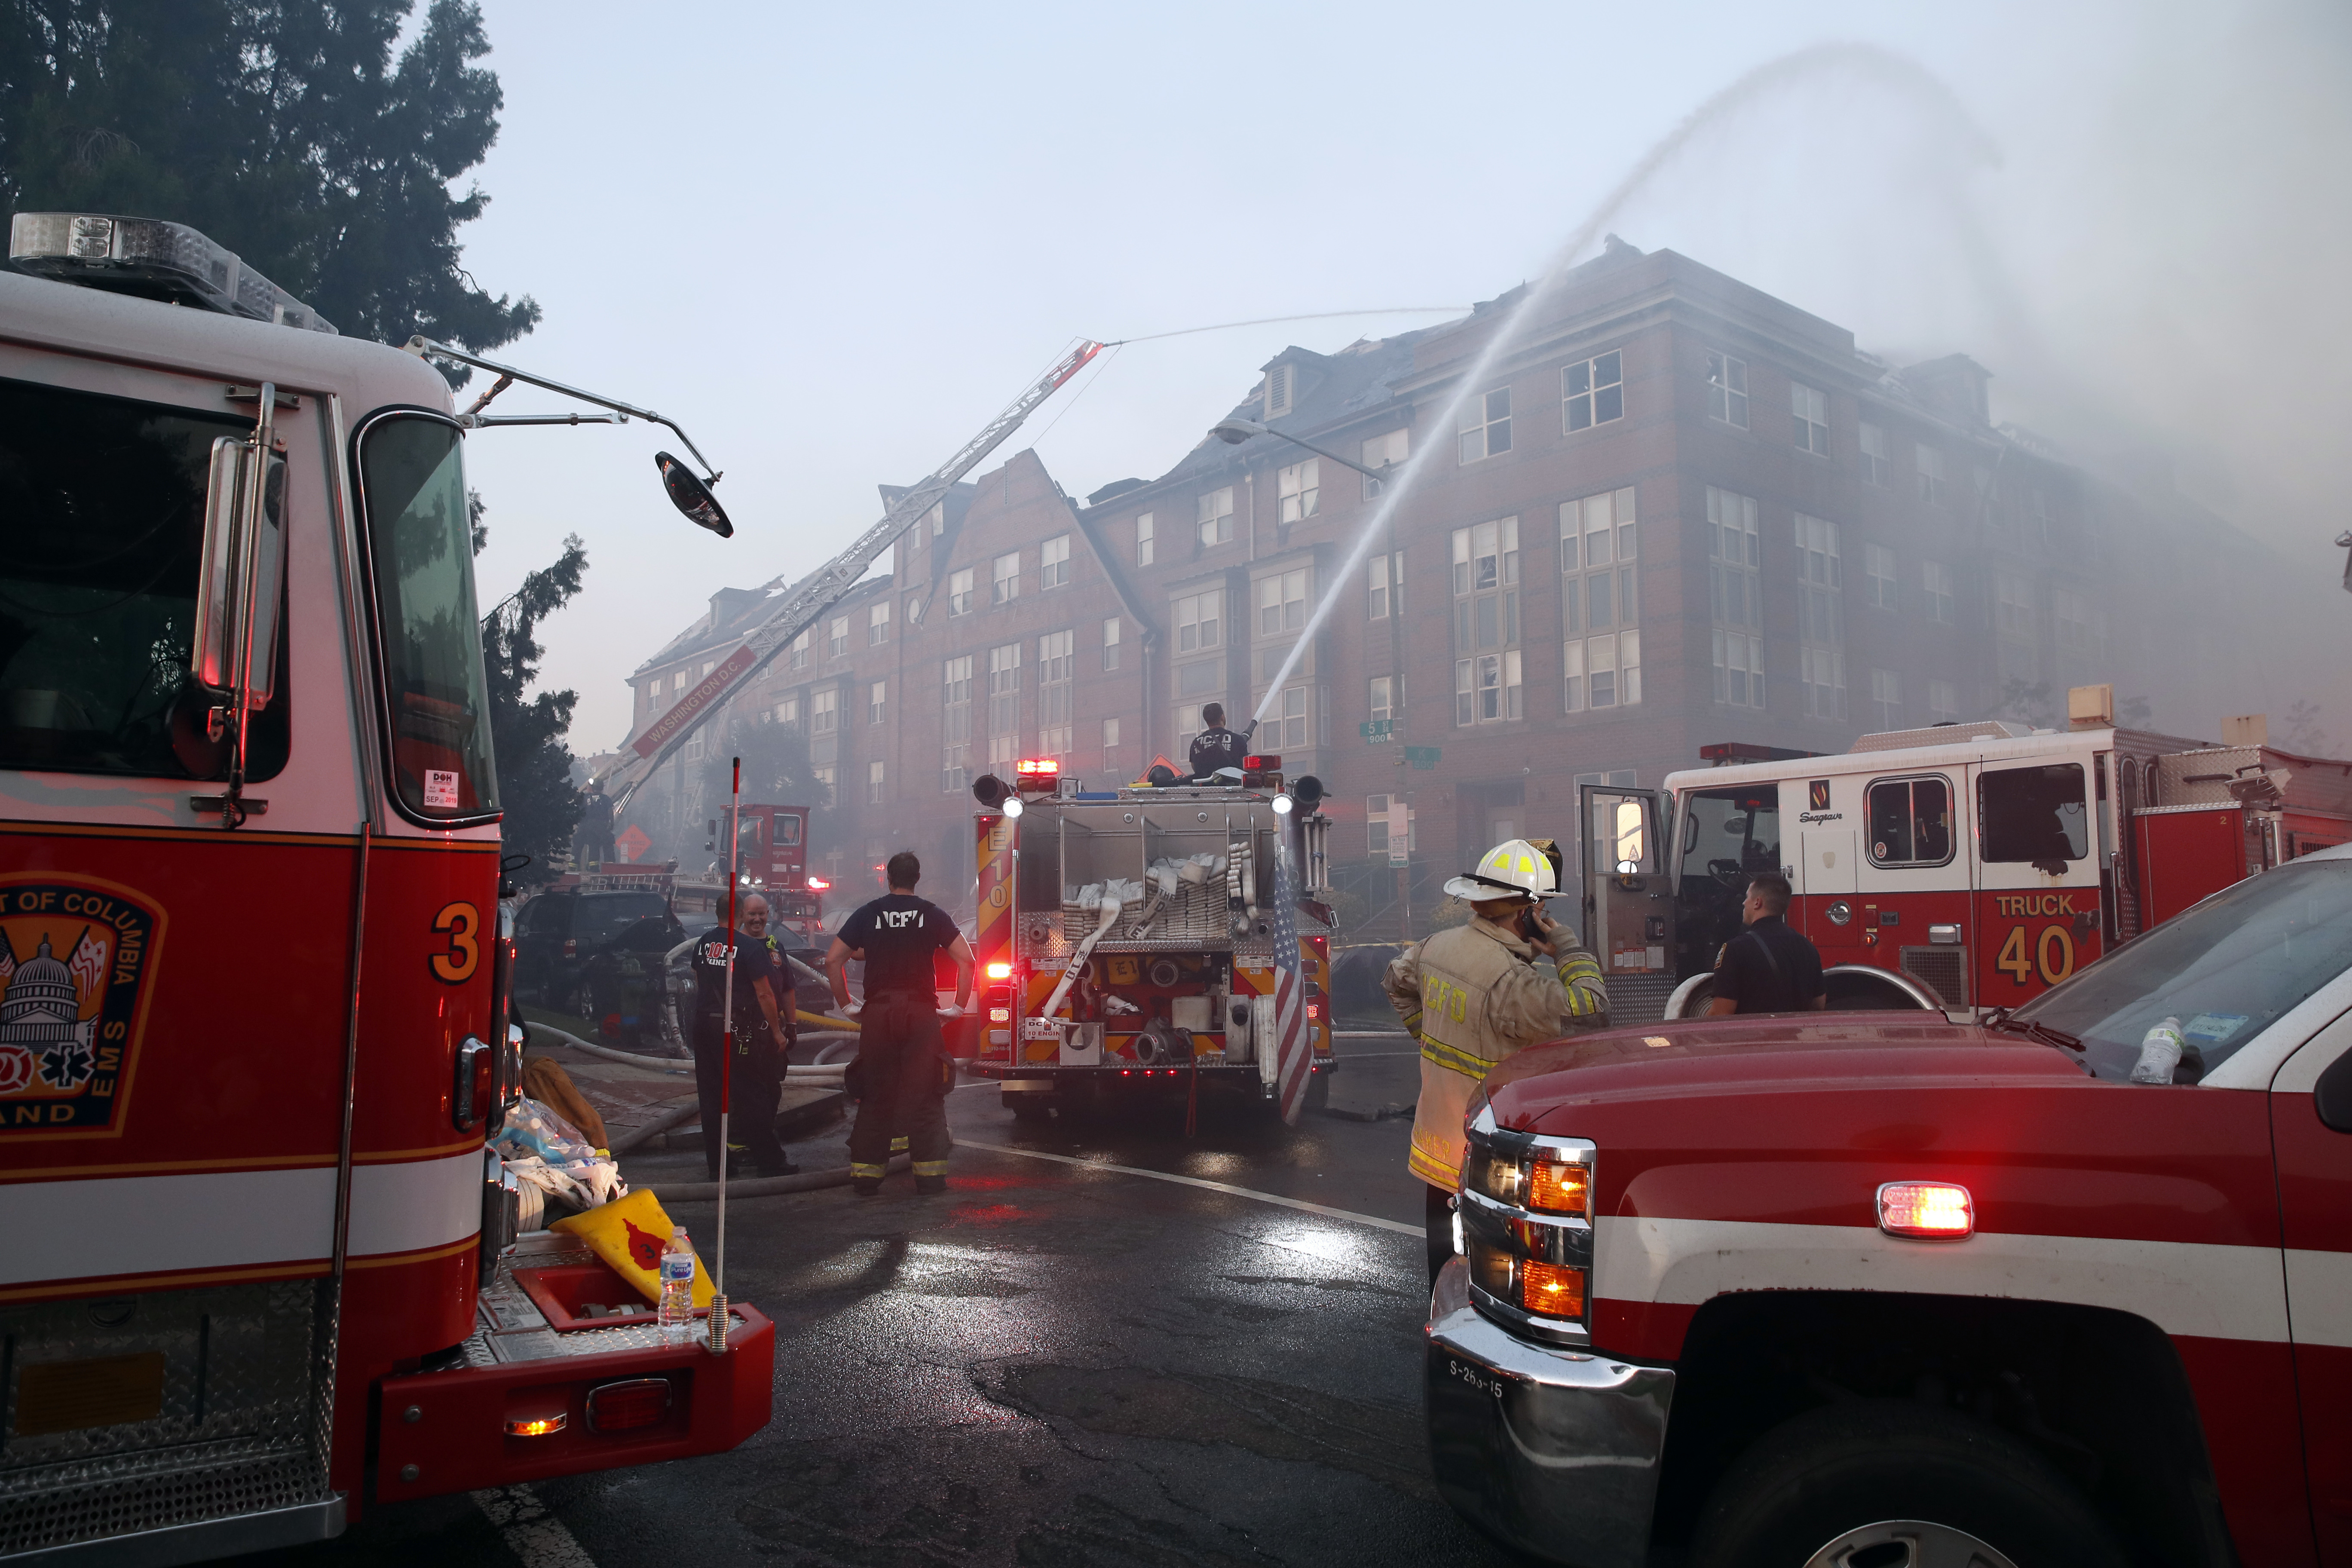 Muslim, Jewish Firefighters Sue Over Facial Hair Policy